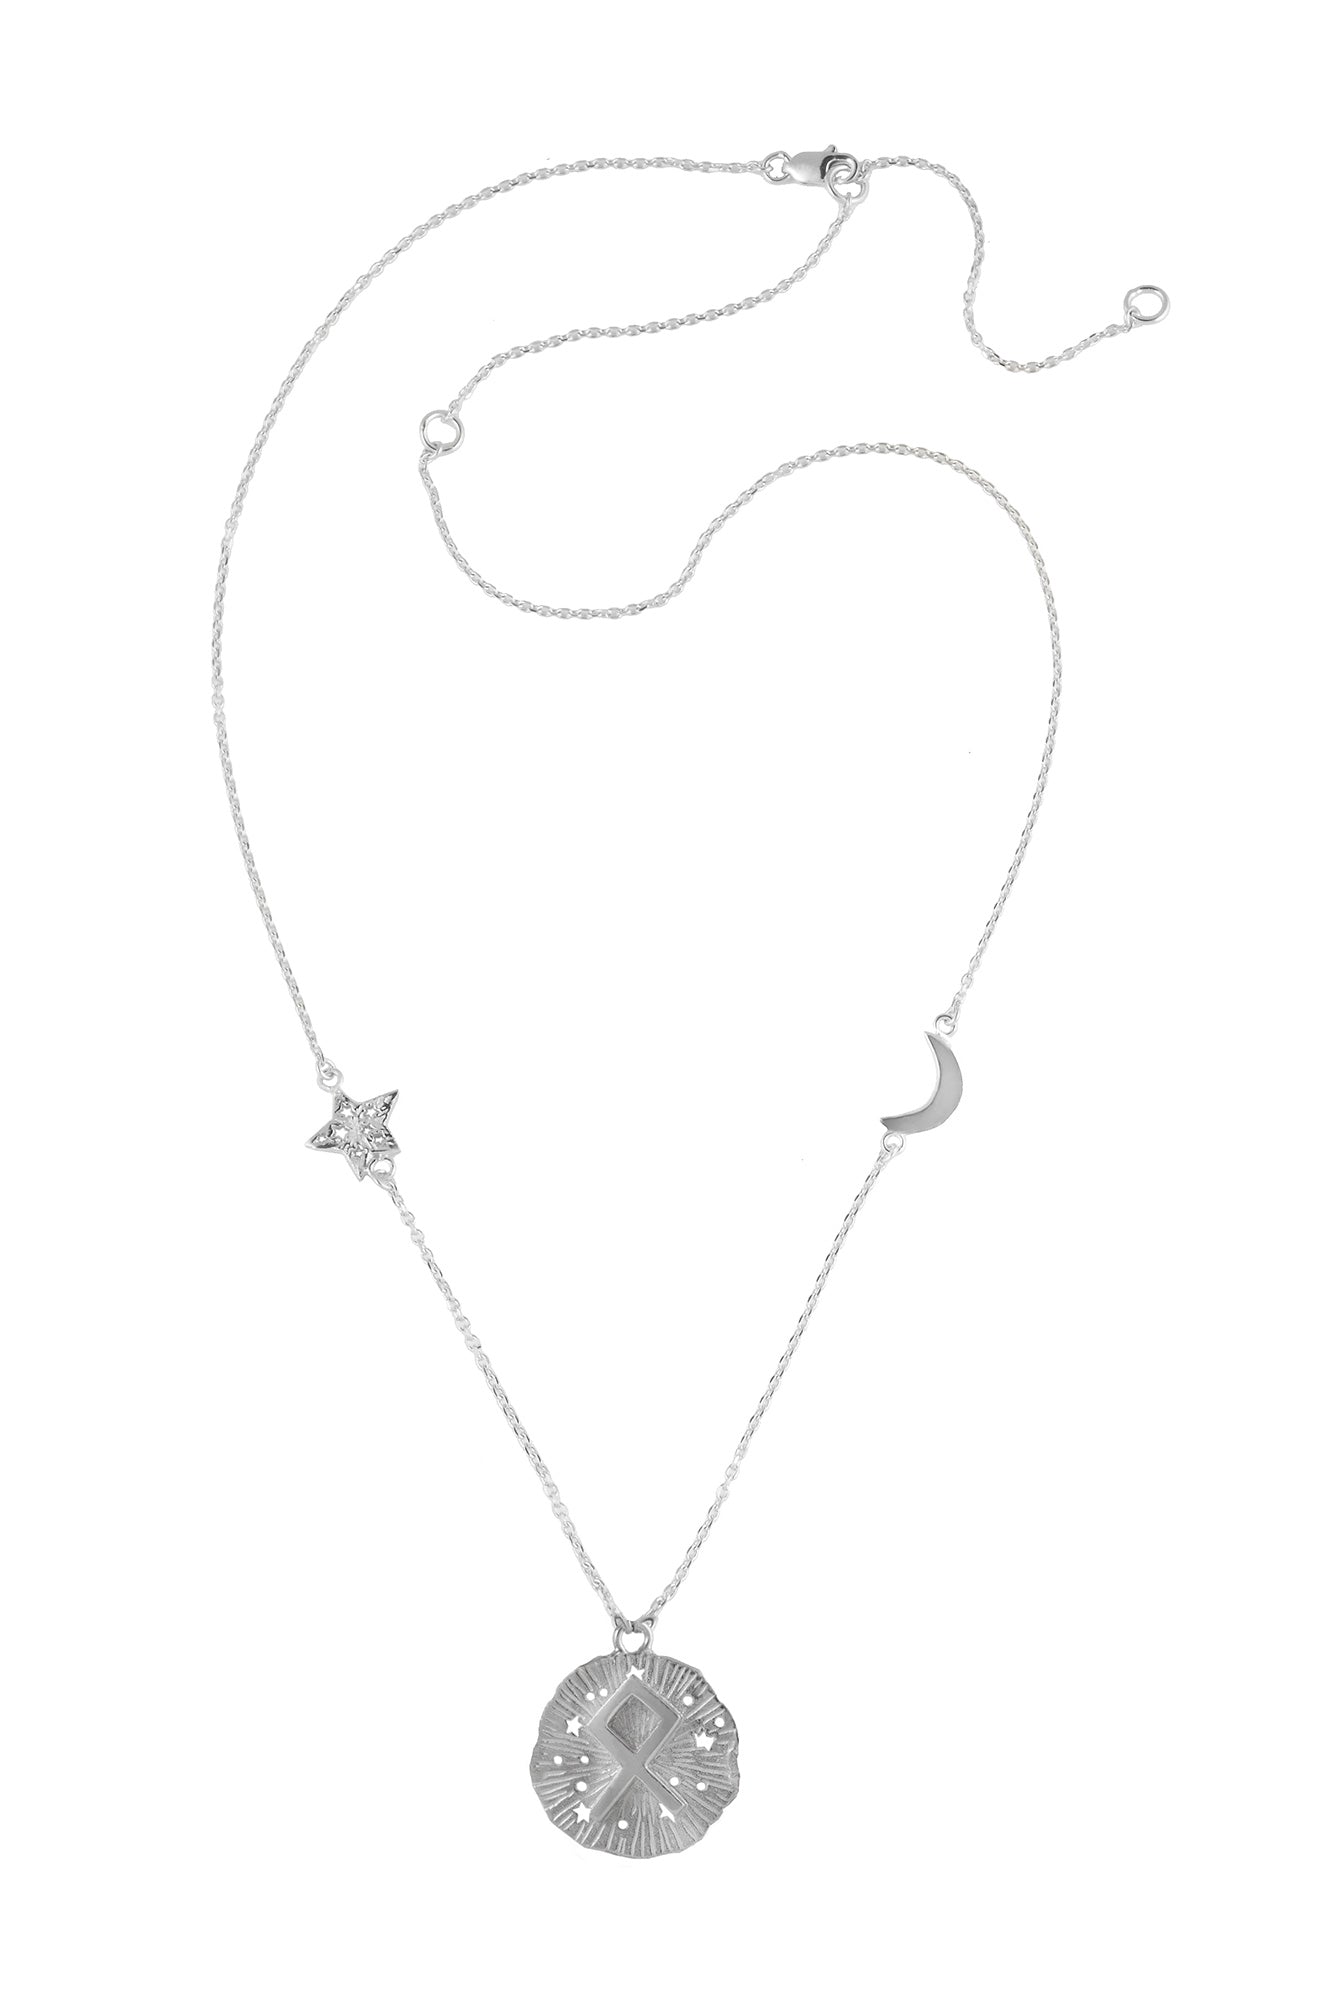 Chain necklace with small runic pendant Odal, star and moon, 46 сm. Silver